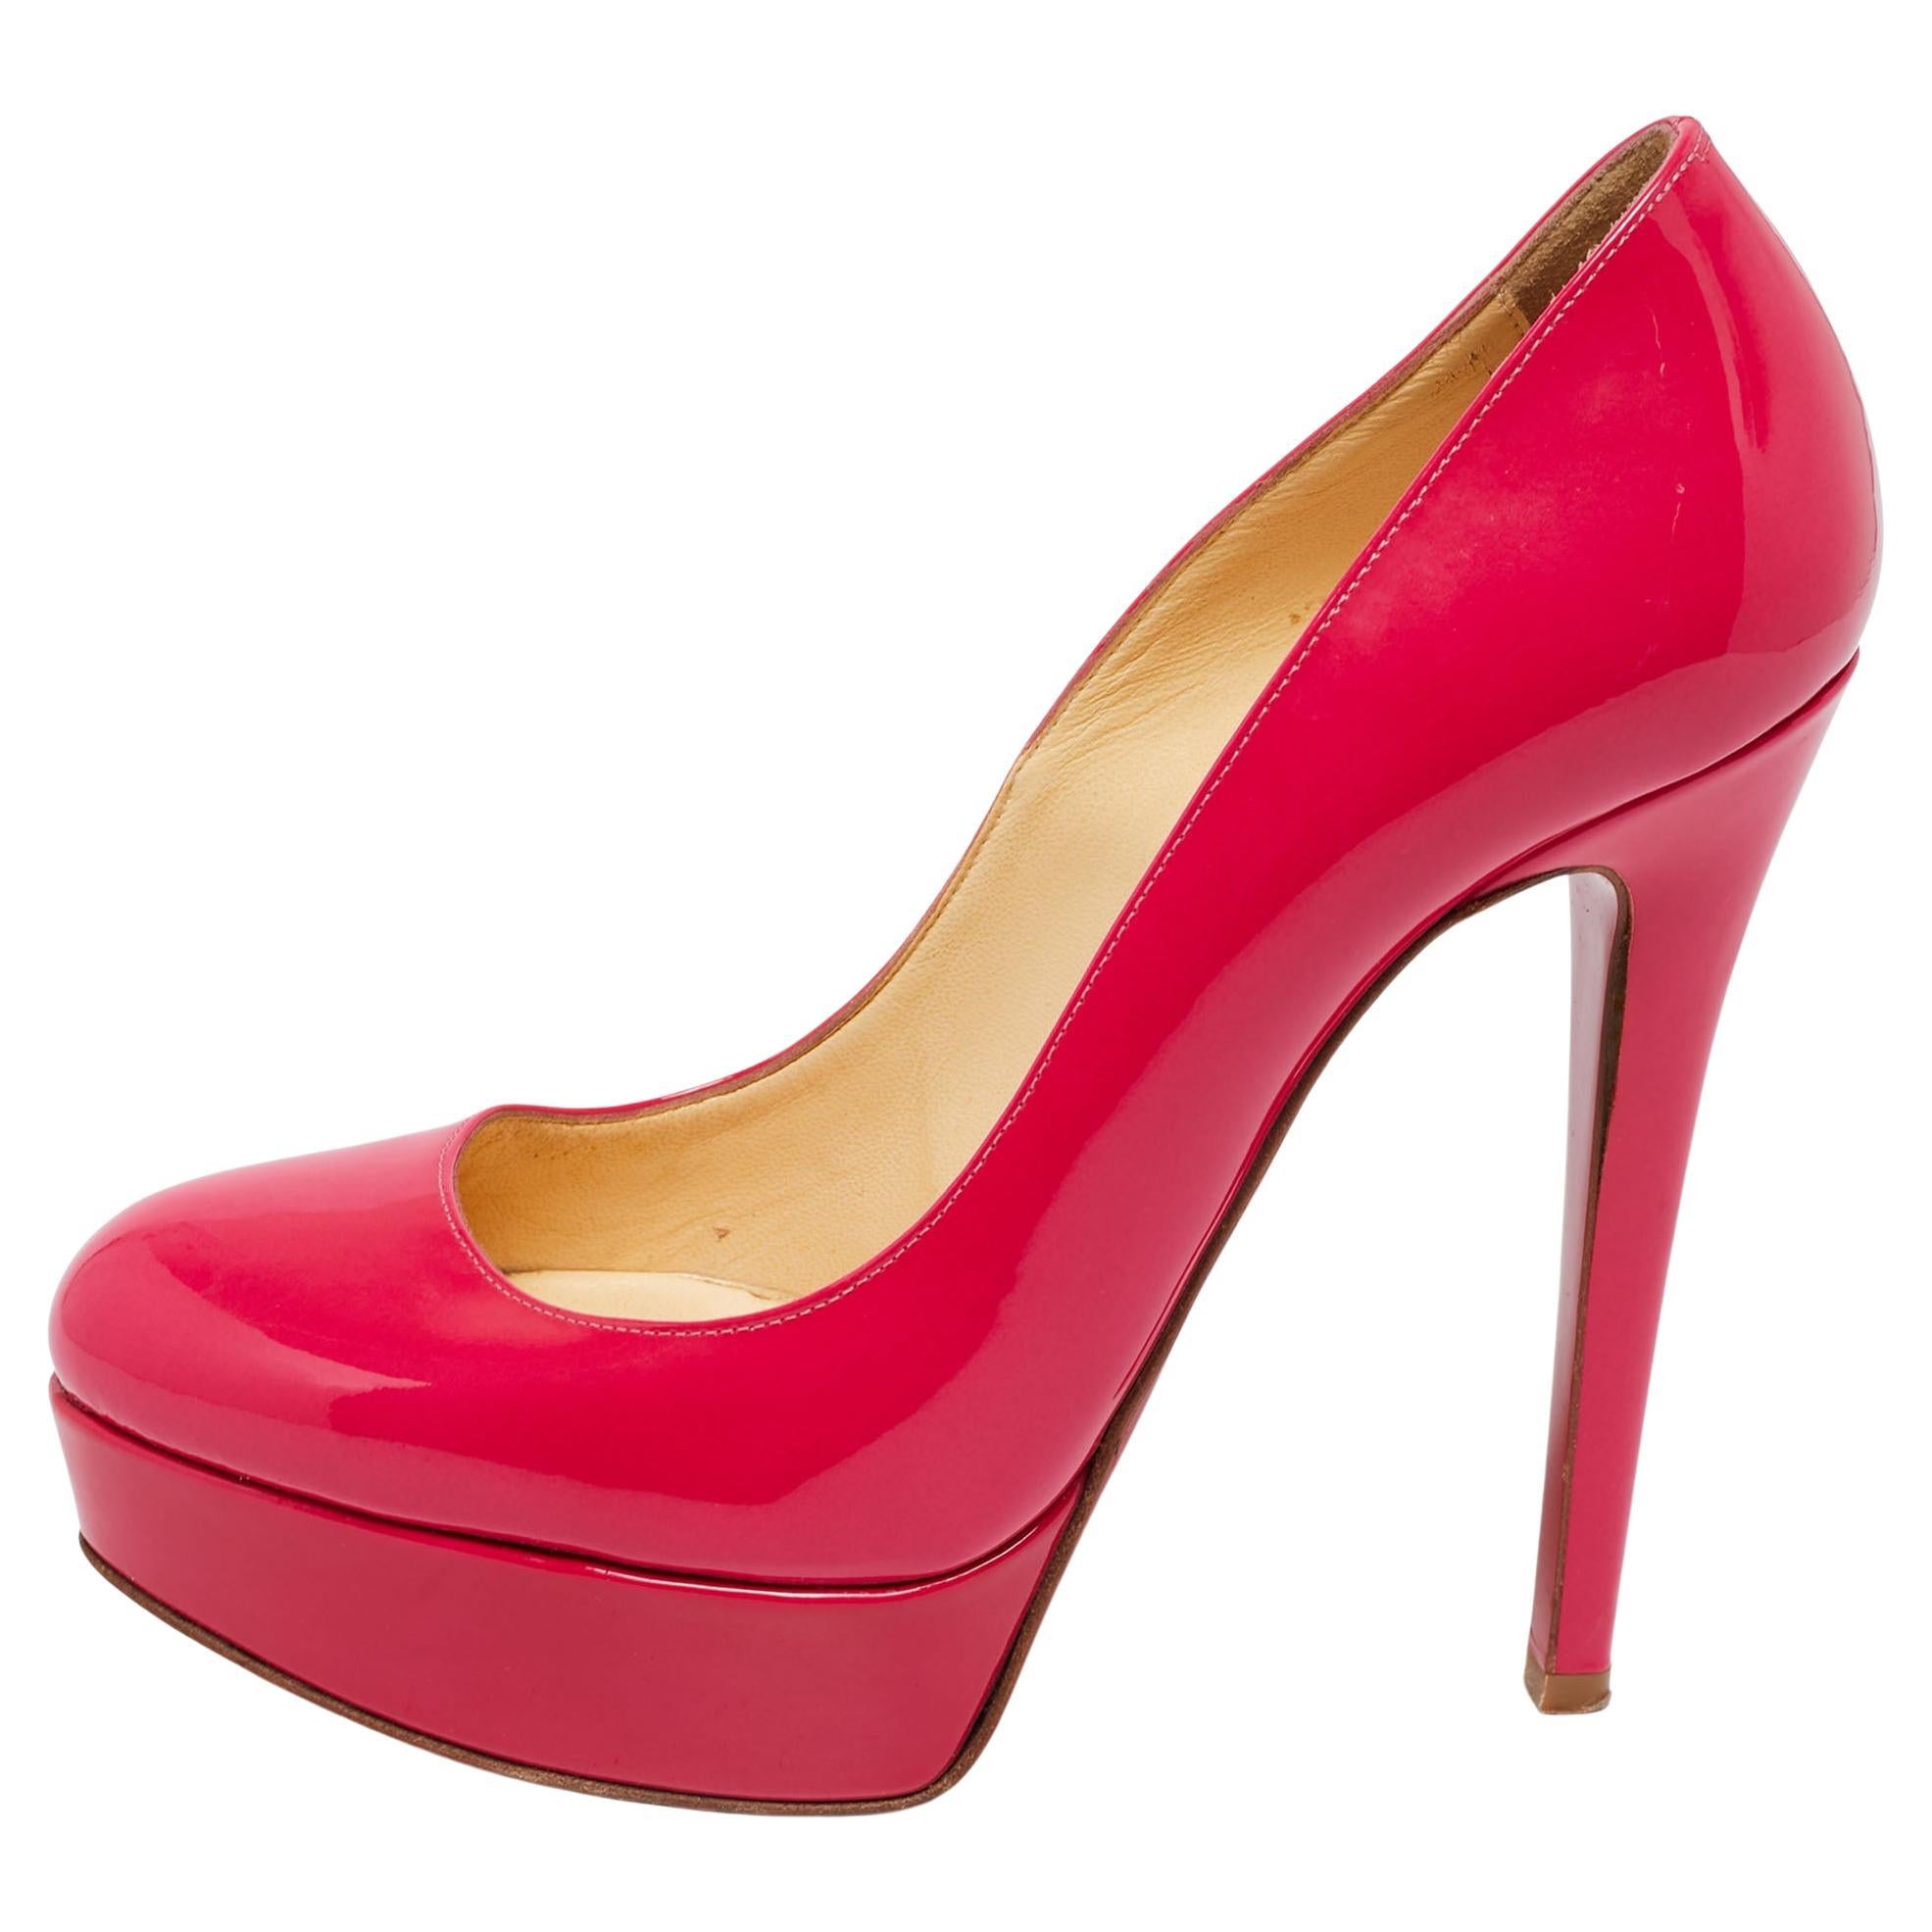 Christian Louboutin Neon Pink Patent Leather Bianca Pumps Size 36 For Sale